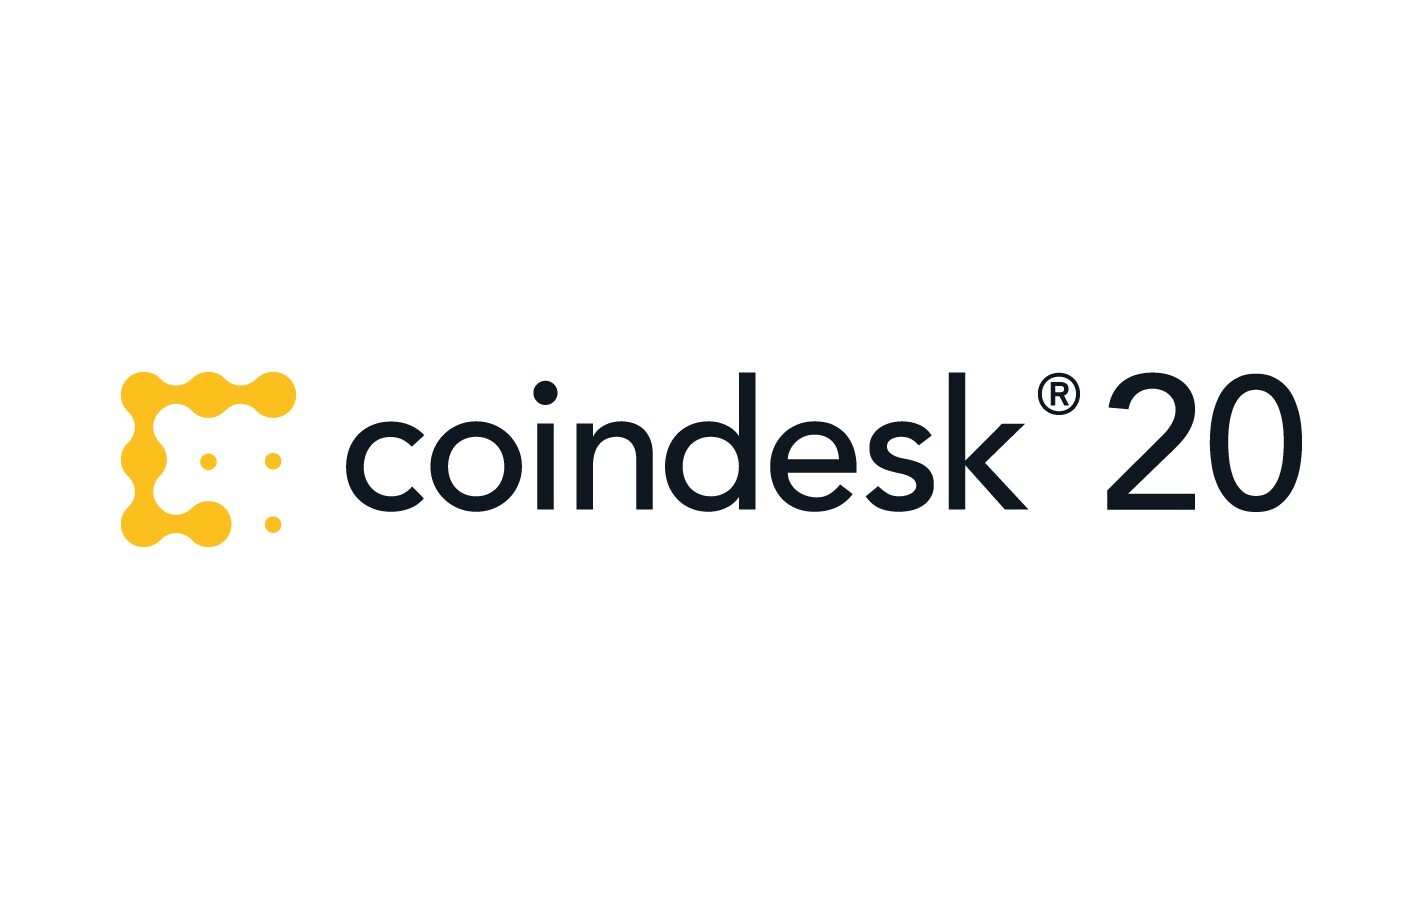 Introducing the CoinDesk 20 – CoinDesk